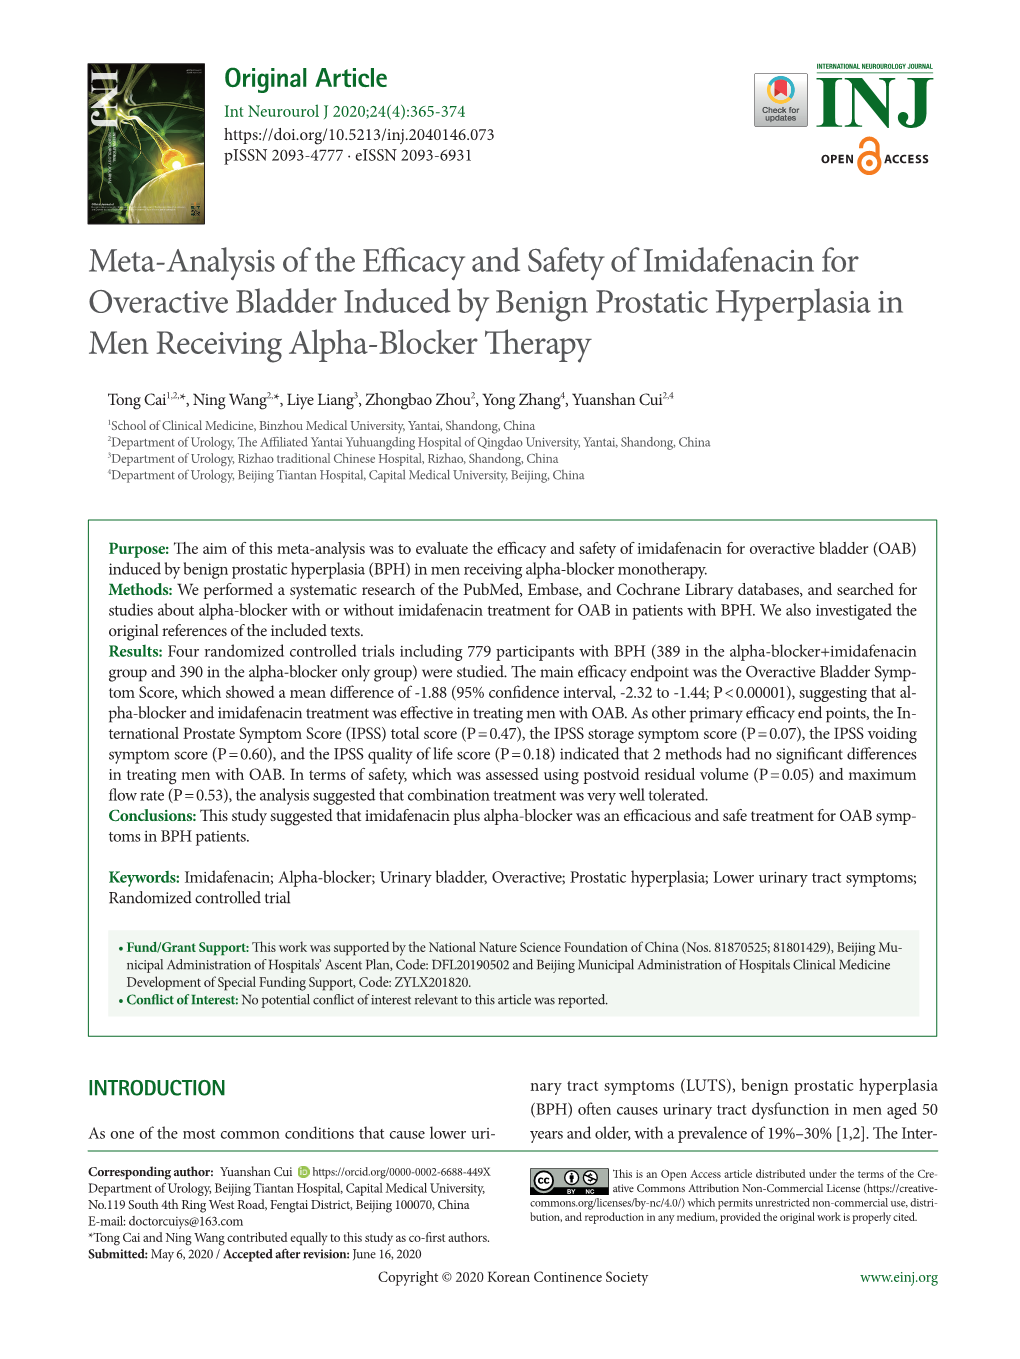 Meta-Analysis of the Efficacy and Safety of Imidafenacin for Overactive Bladder Induced by Benign Prostatic Hyperplasia in Men Receiving Alpha-Blocker Therapy